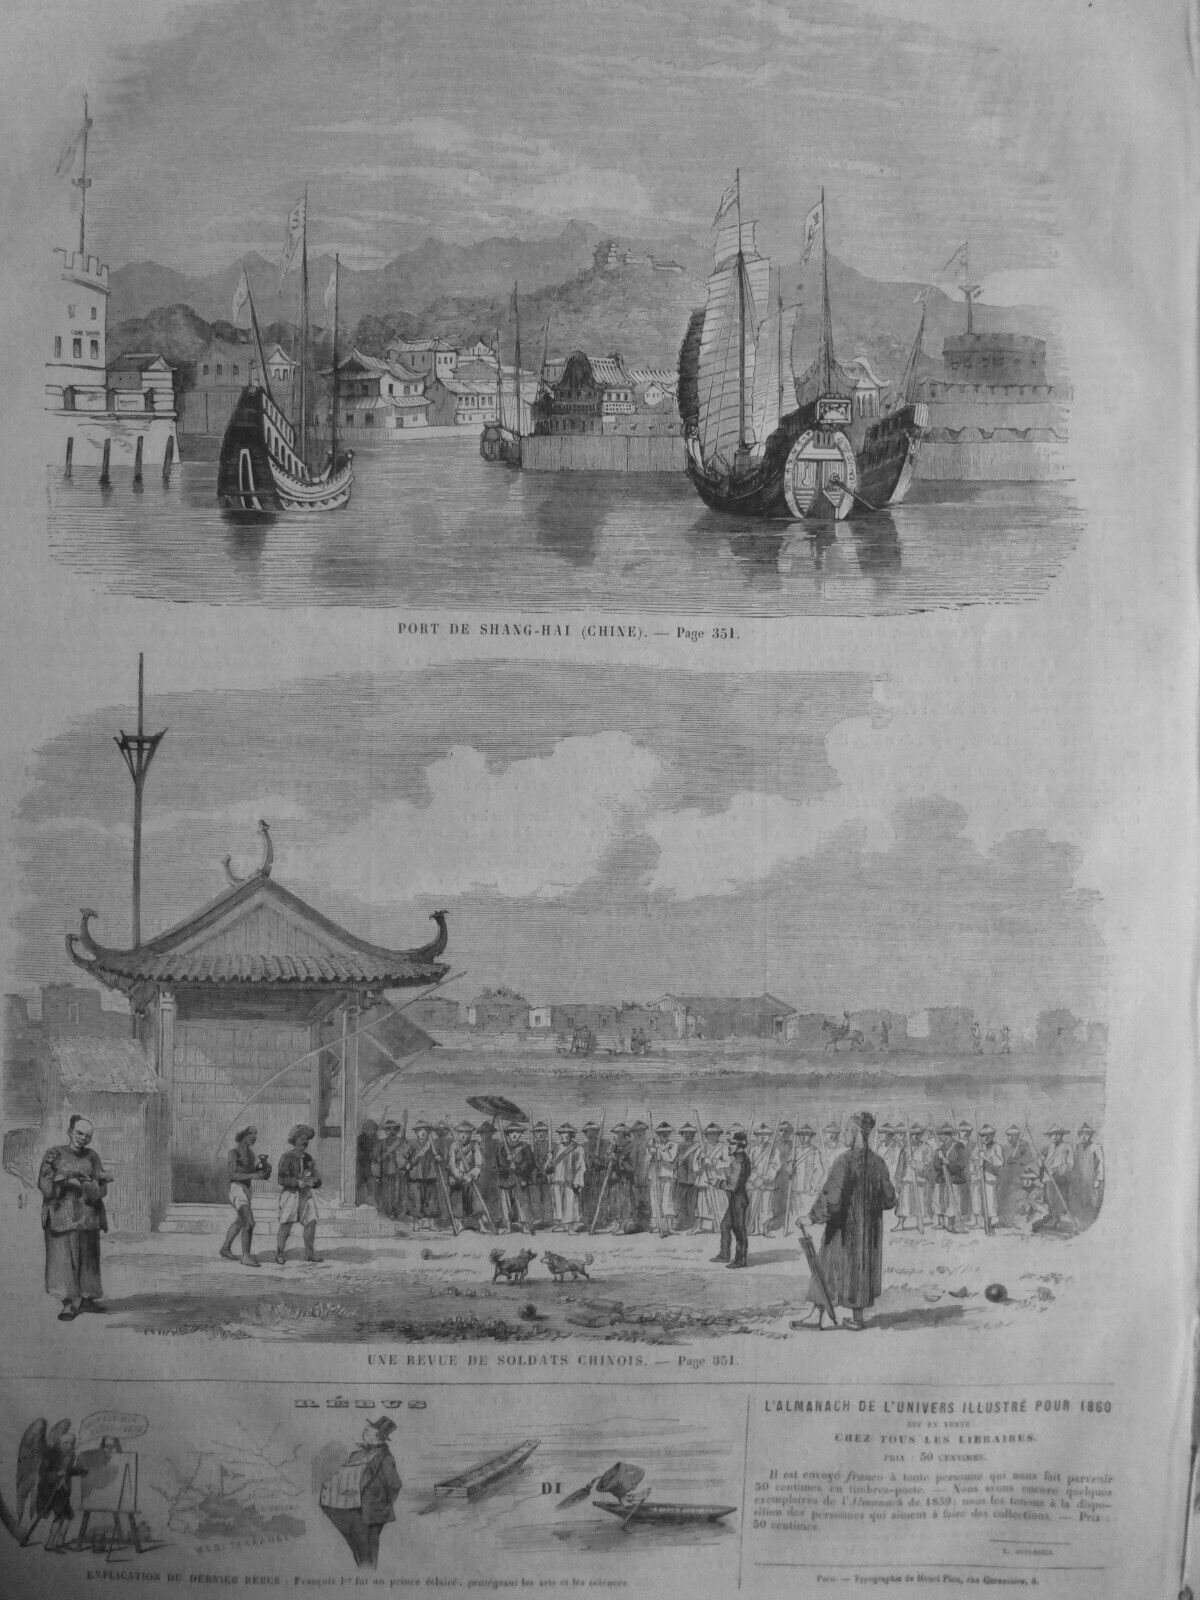 1859 1911 China Shanghai Guerre Port Soldier 2 Newspapers Antique